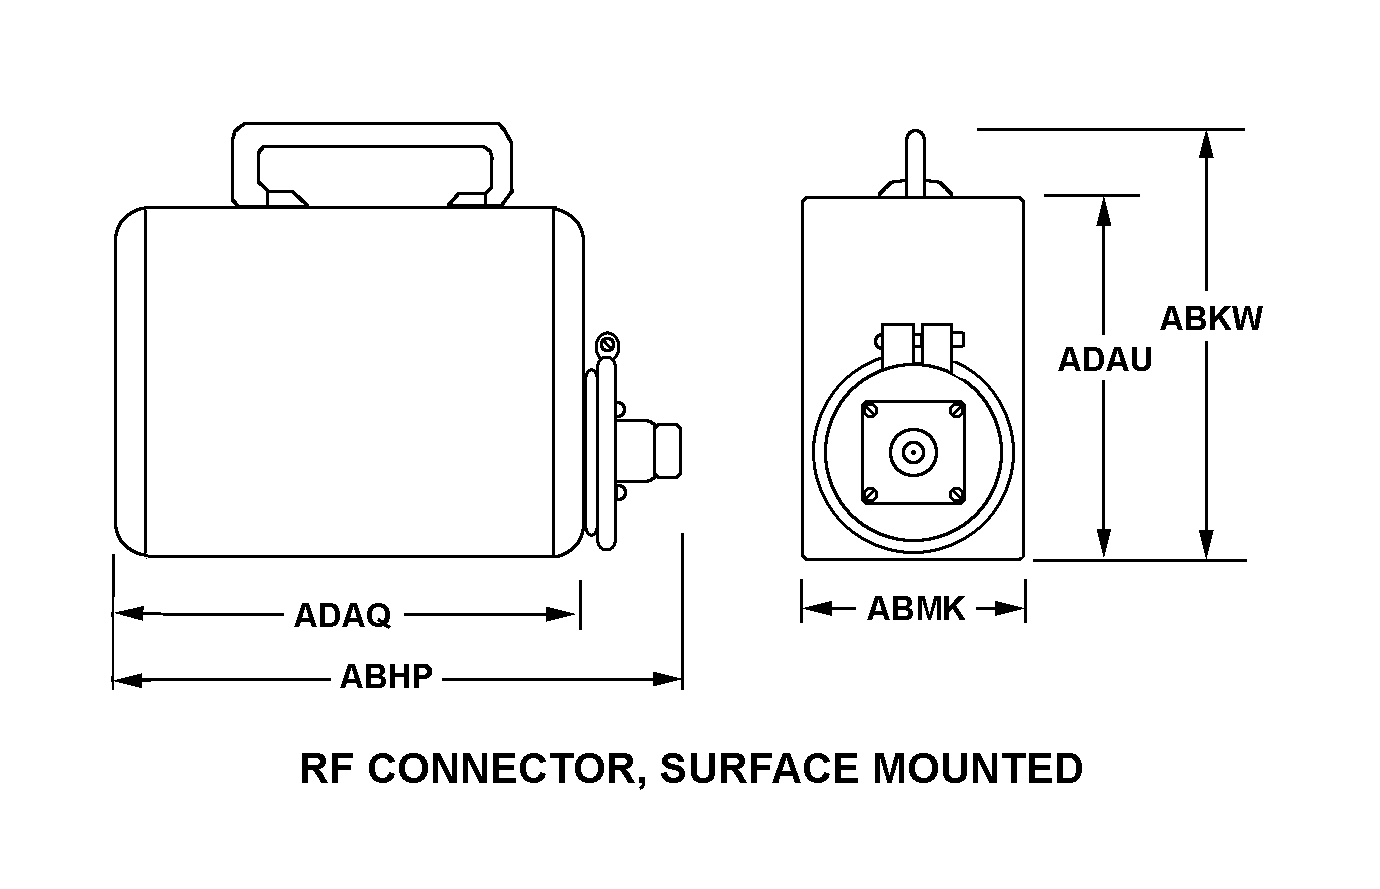 RF CONNECTOR, SURFACE MOUNTED style nsn 5985-00-069-3593